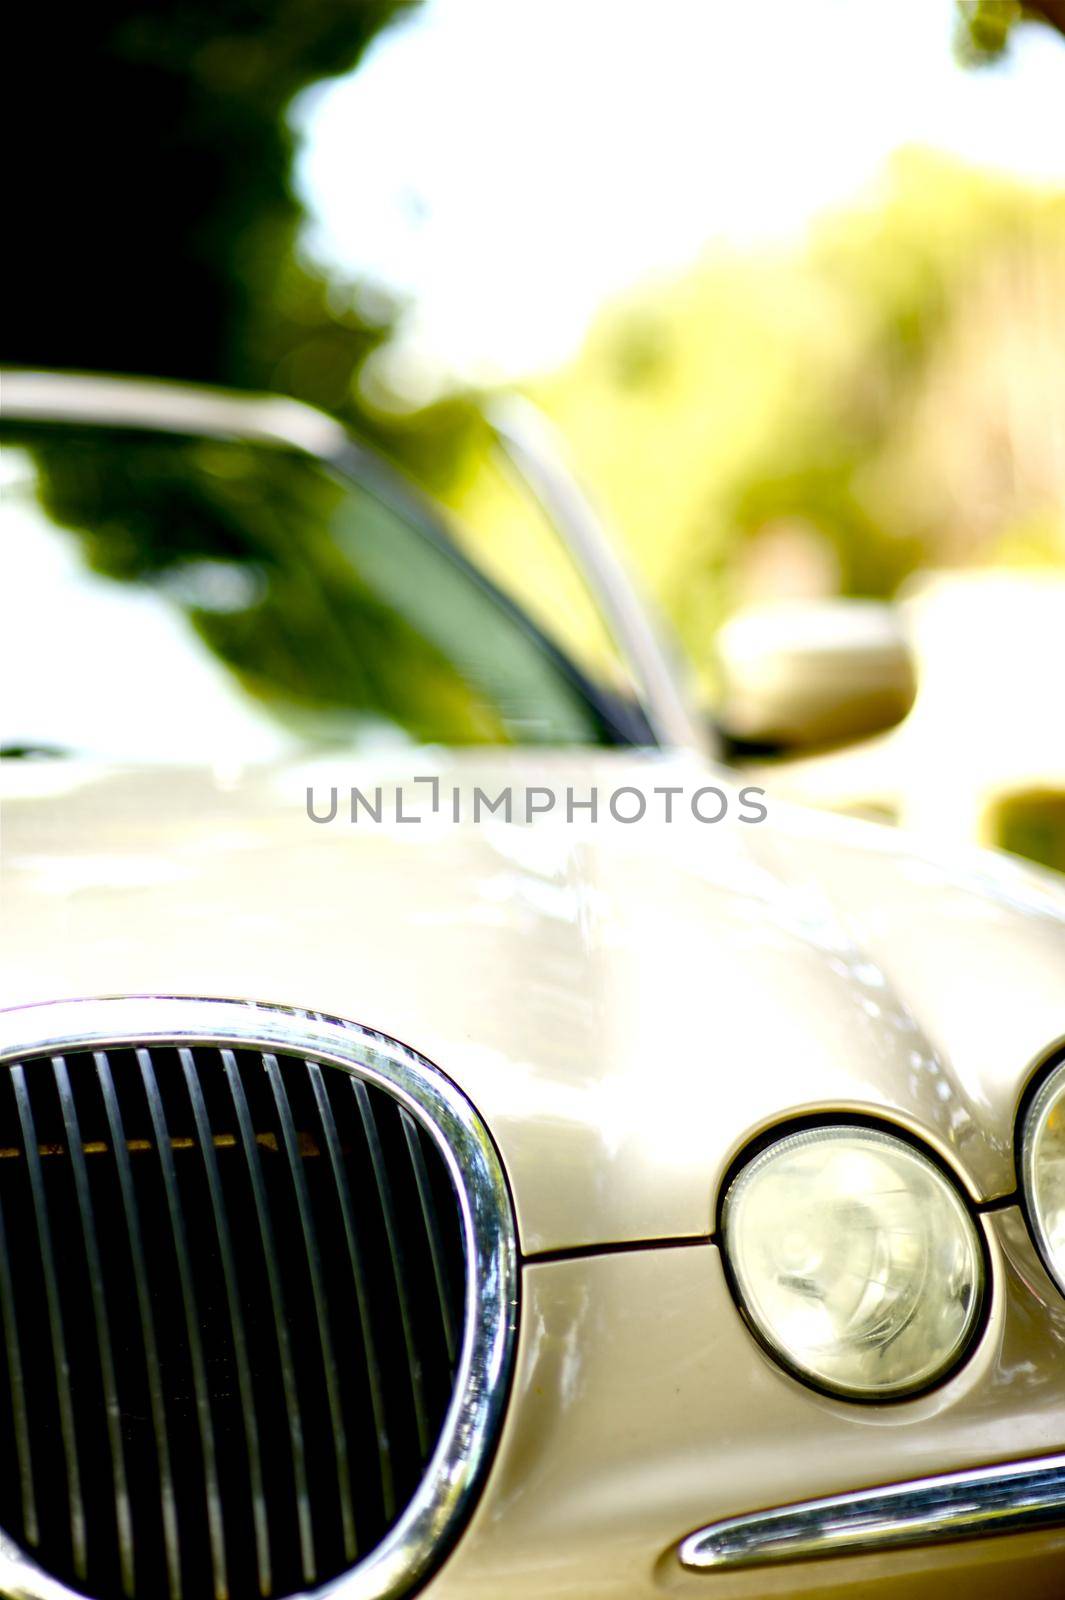 Luxury Vehicle (Car Front) in Sunny Day. Golden Body. Transportation Stock Photo by welcomia